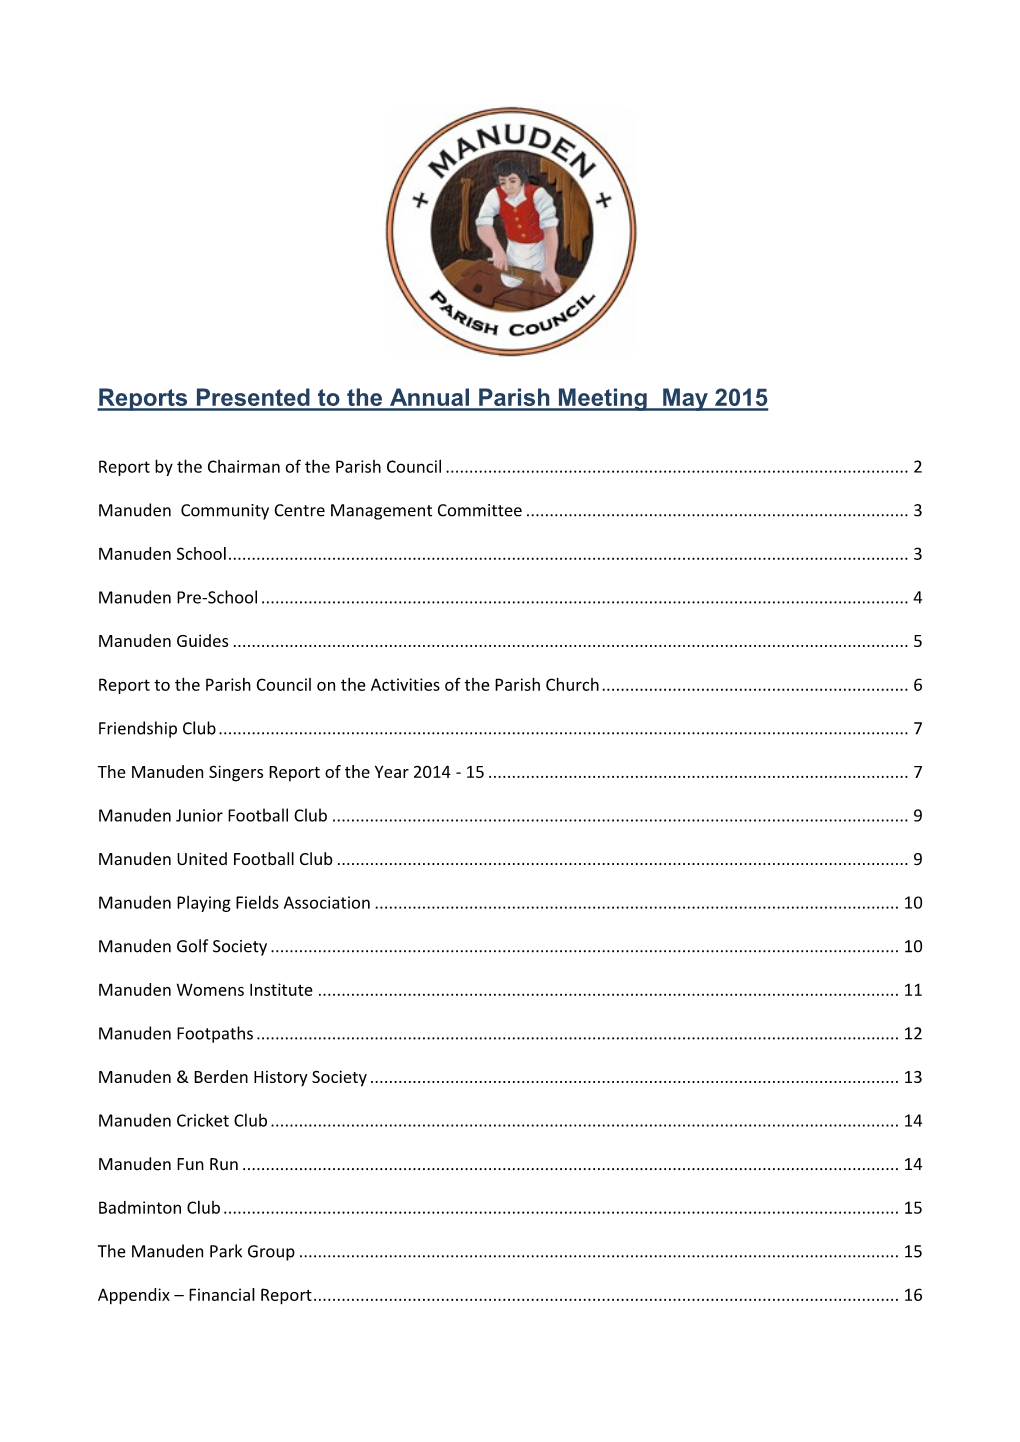 Reports Presented to the Annual Parish Meeting May 2015